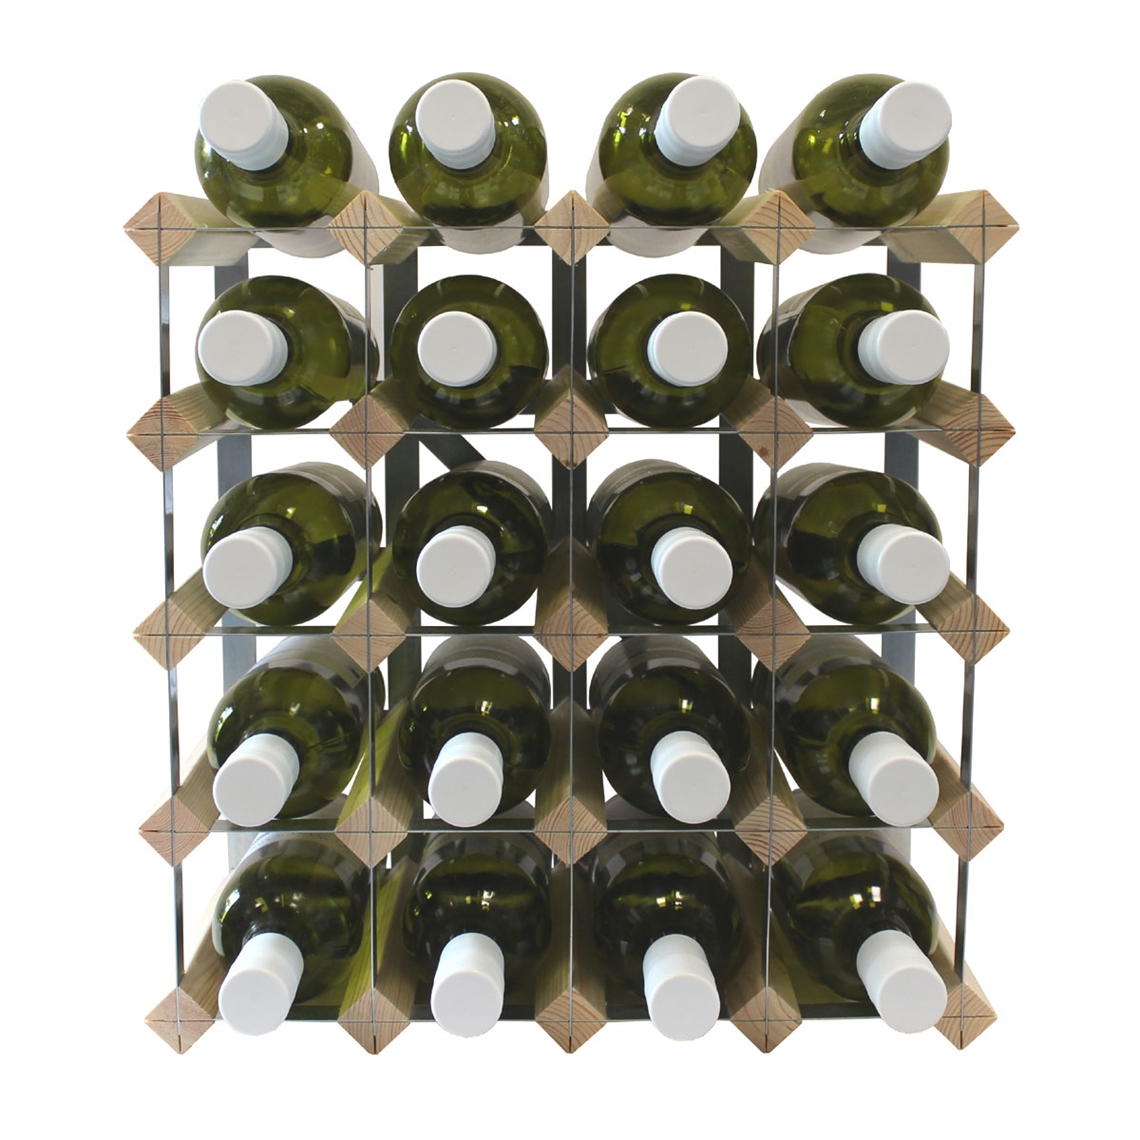 View more moveable wine storage from our Assembled Wine Racks range